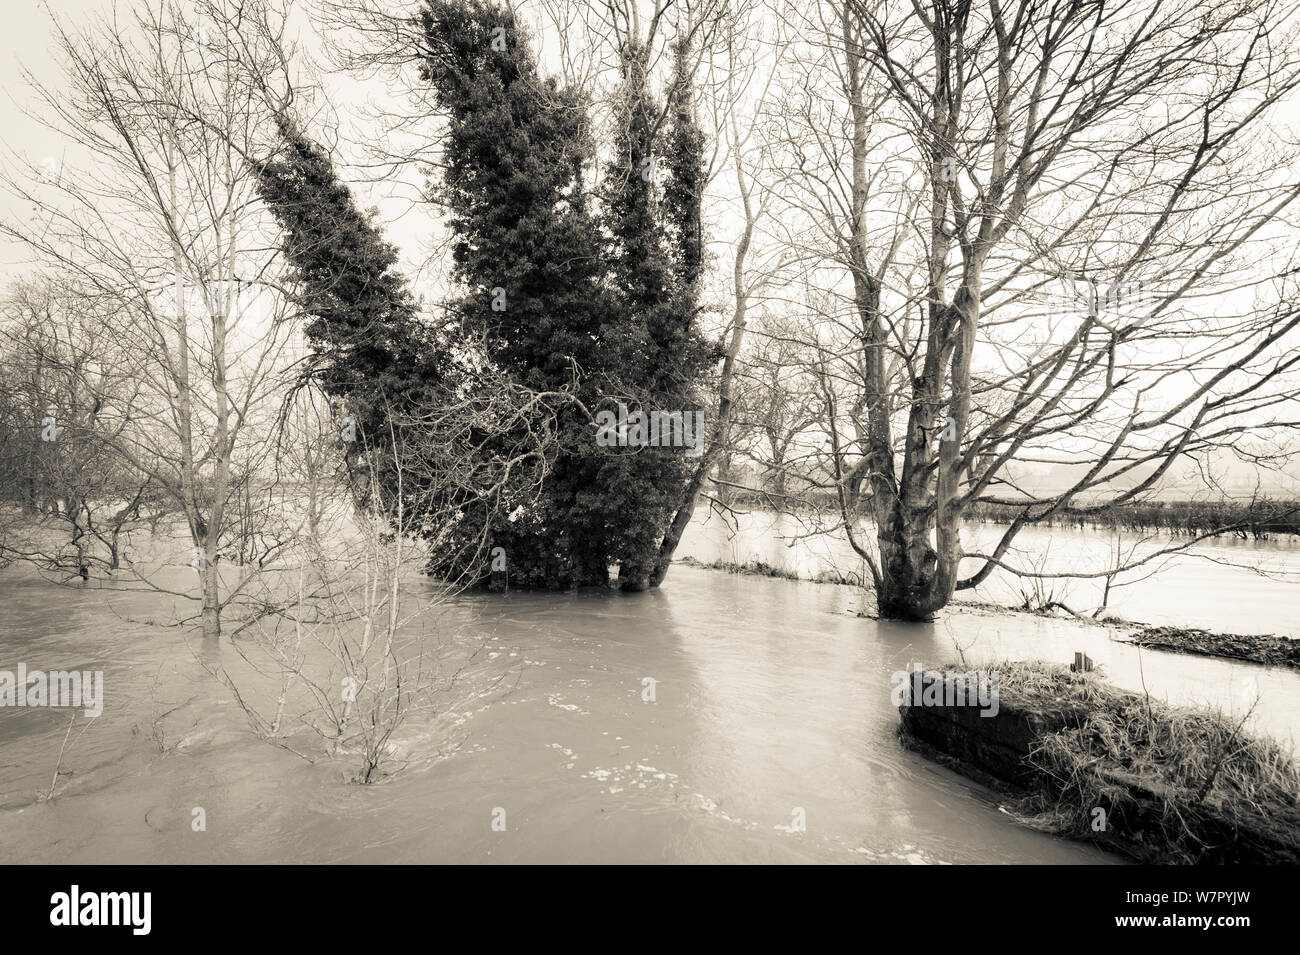 Flooding on the River South Esk. Angus, Scotland, 23rd December 2012. Stock Photo